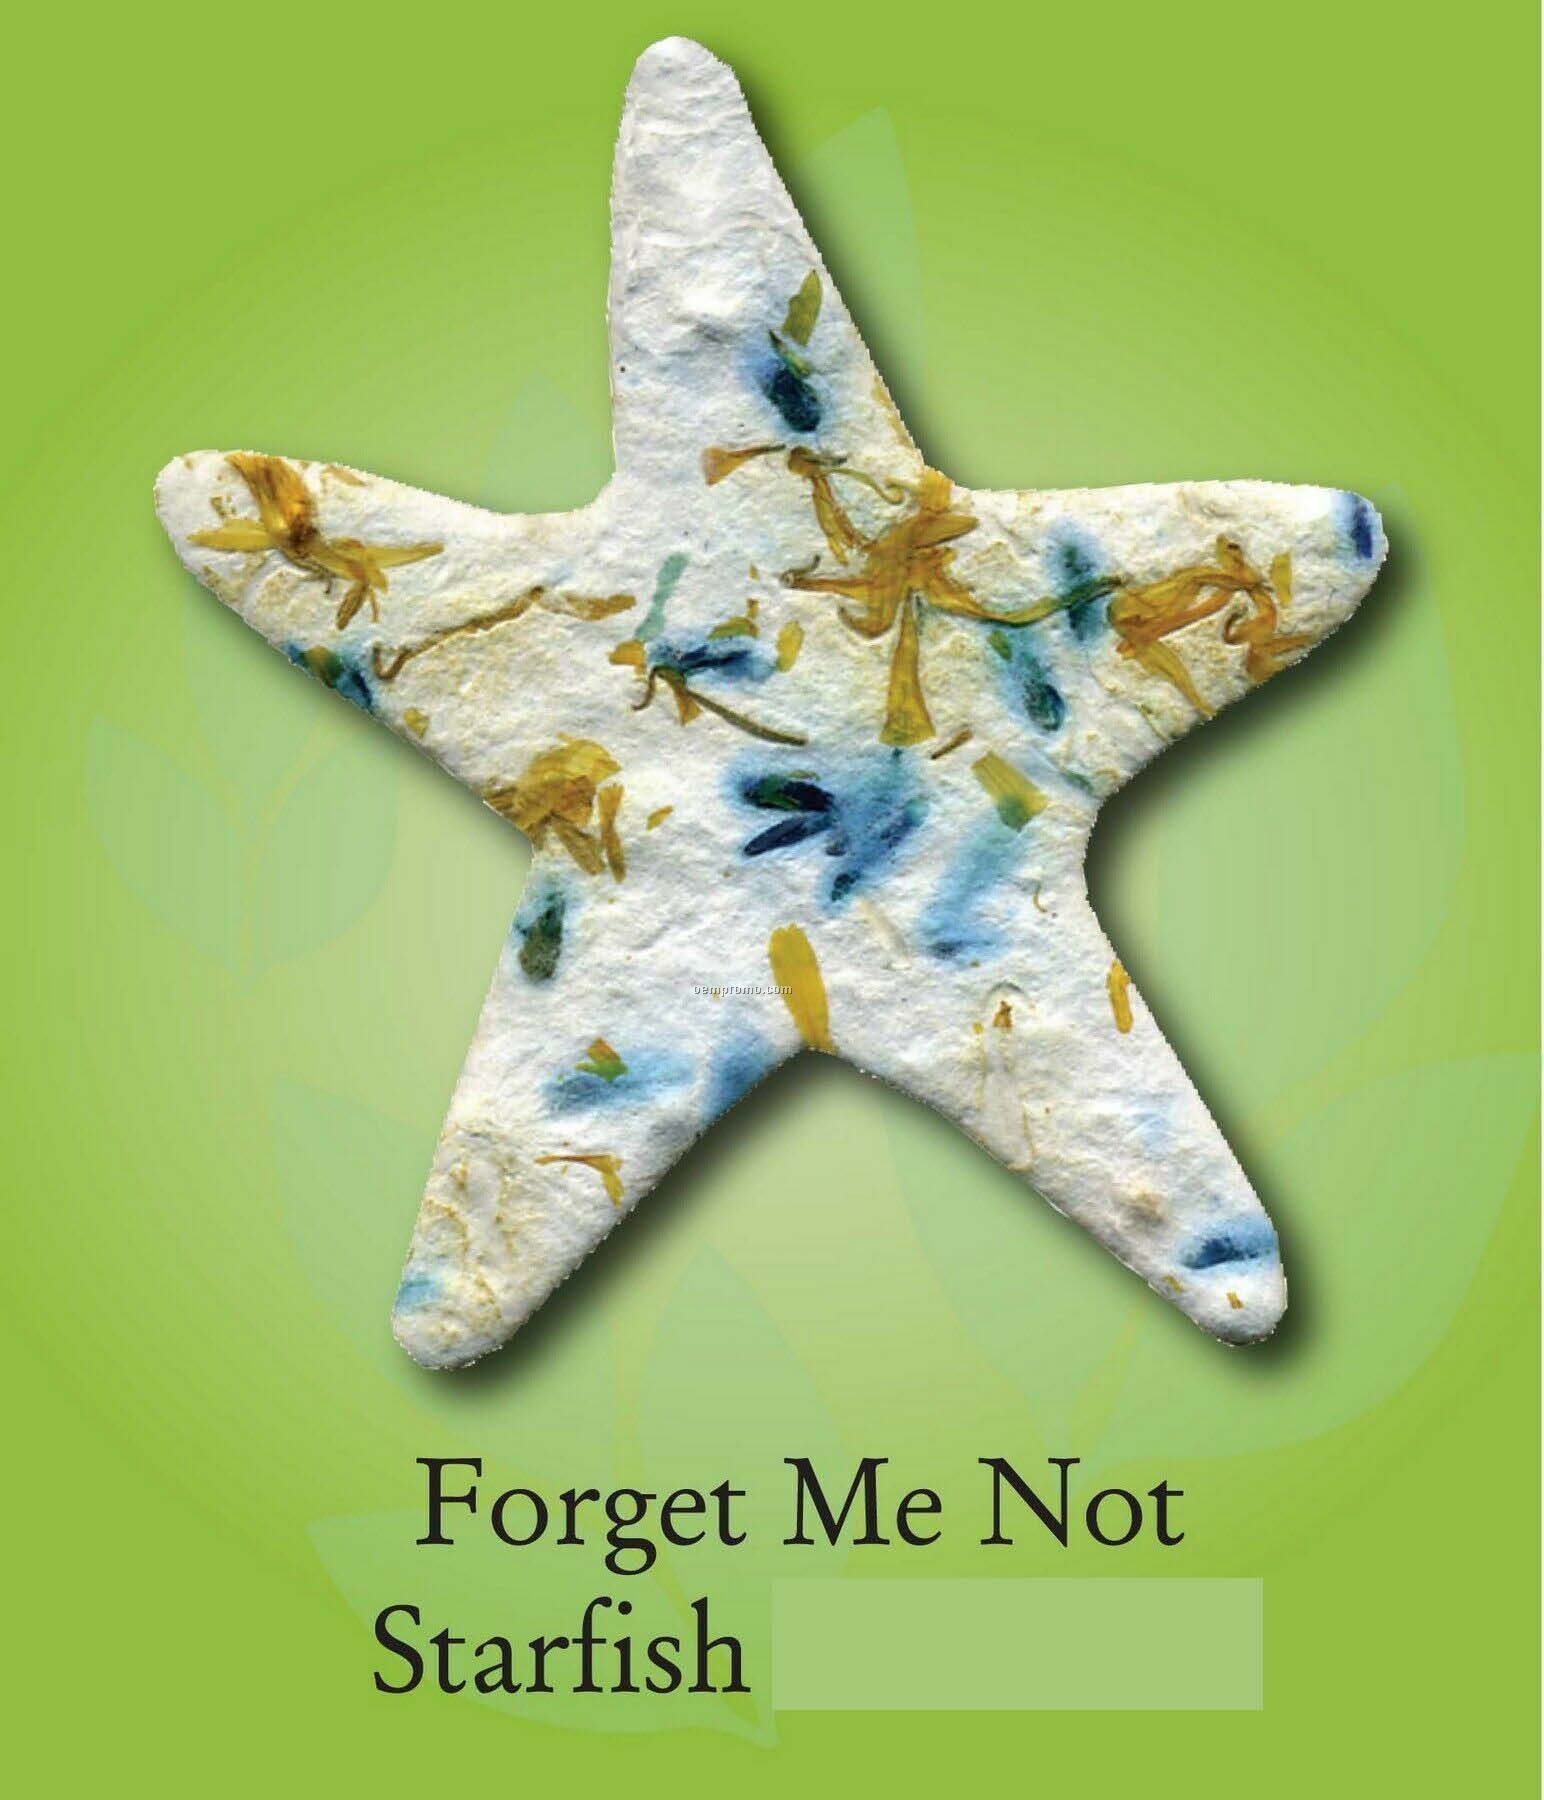 Forget Me Not Starfish Ornament With Embedded Seed